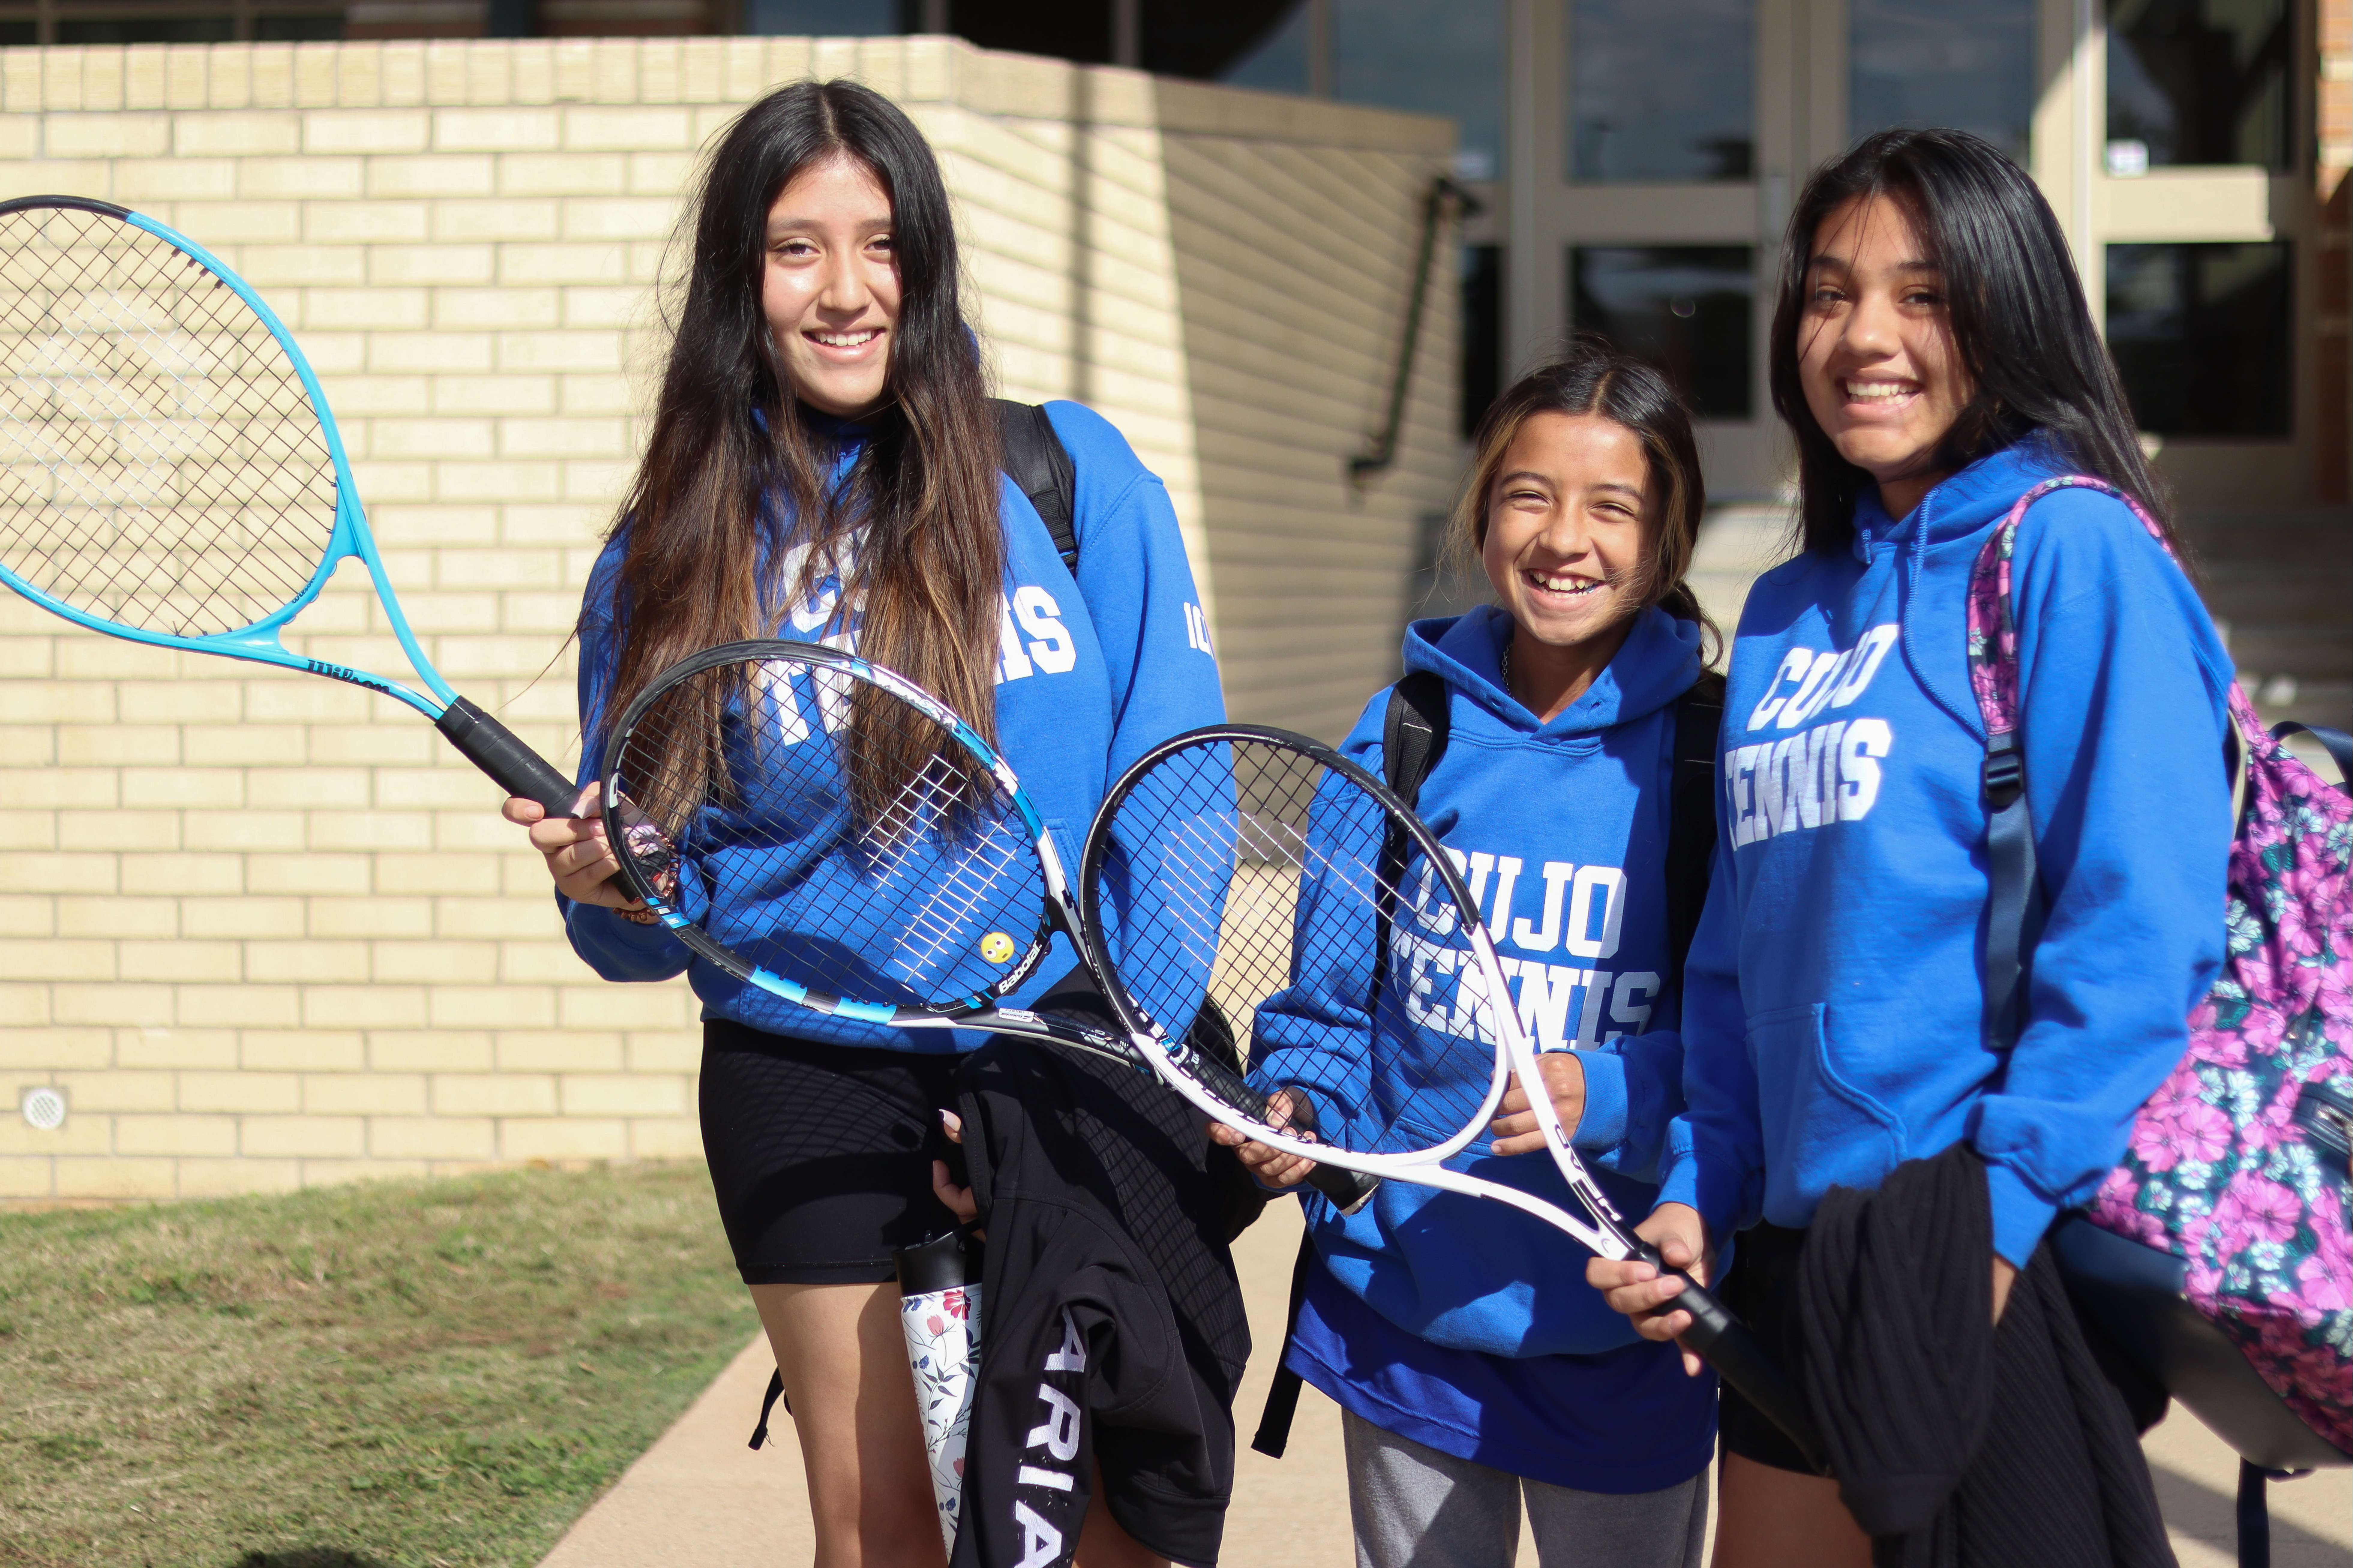 three teenage girls holding tennis racquets and smiling